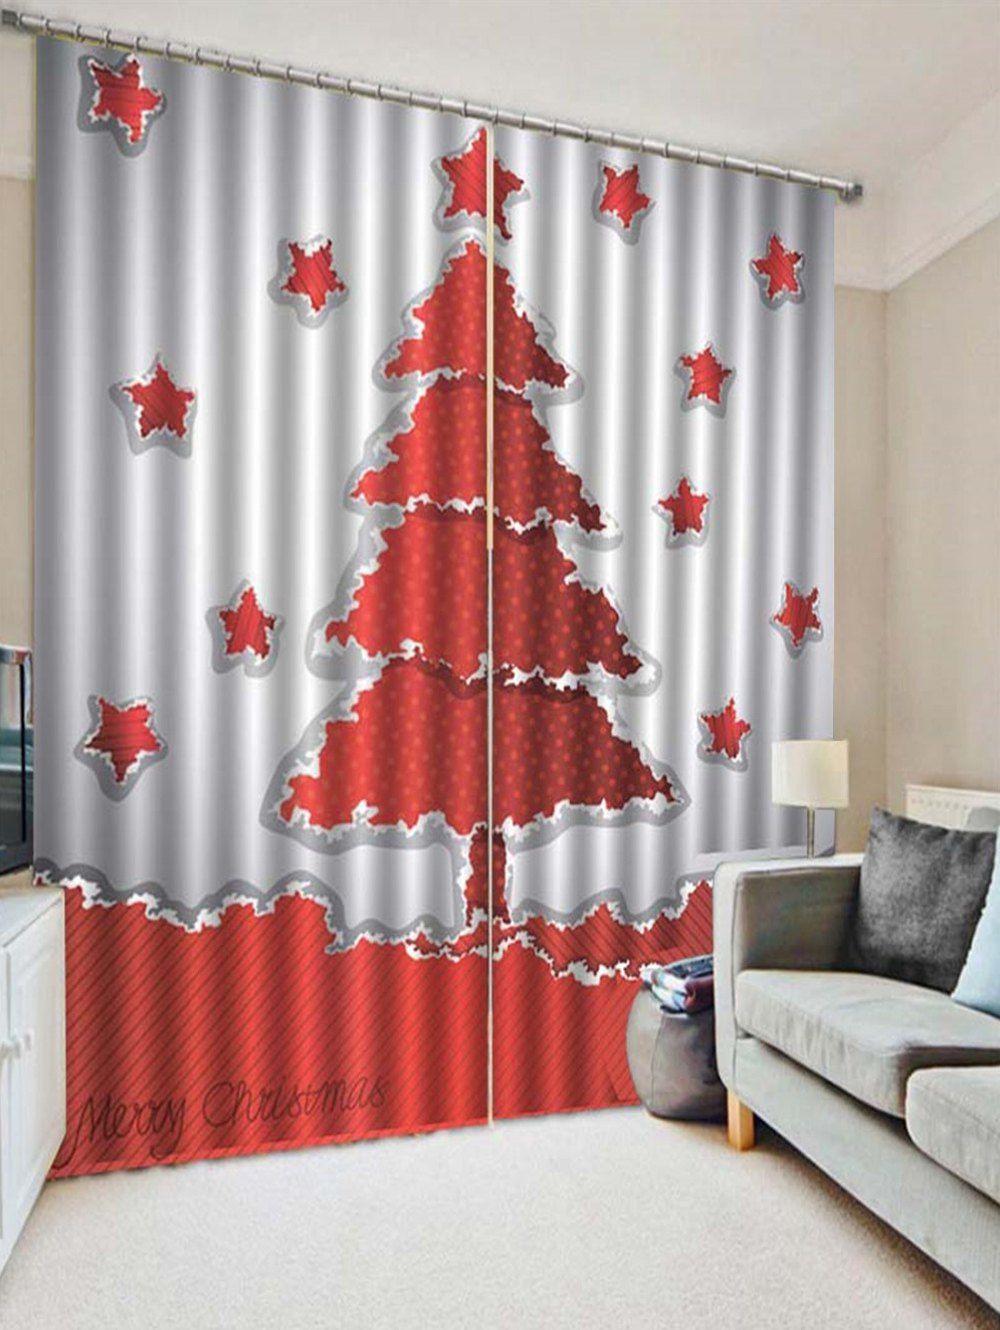 2PCS Christmas Tree Star Printed Window Curtains [50% OFF] | Rosegal